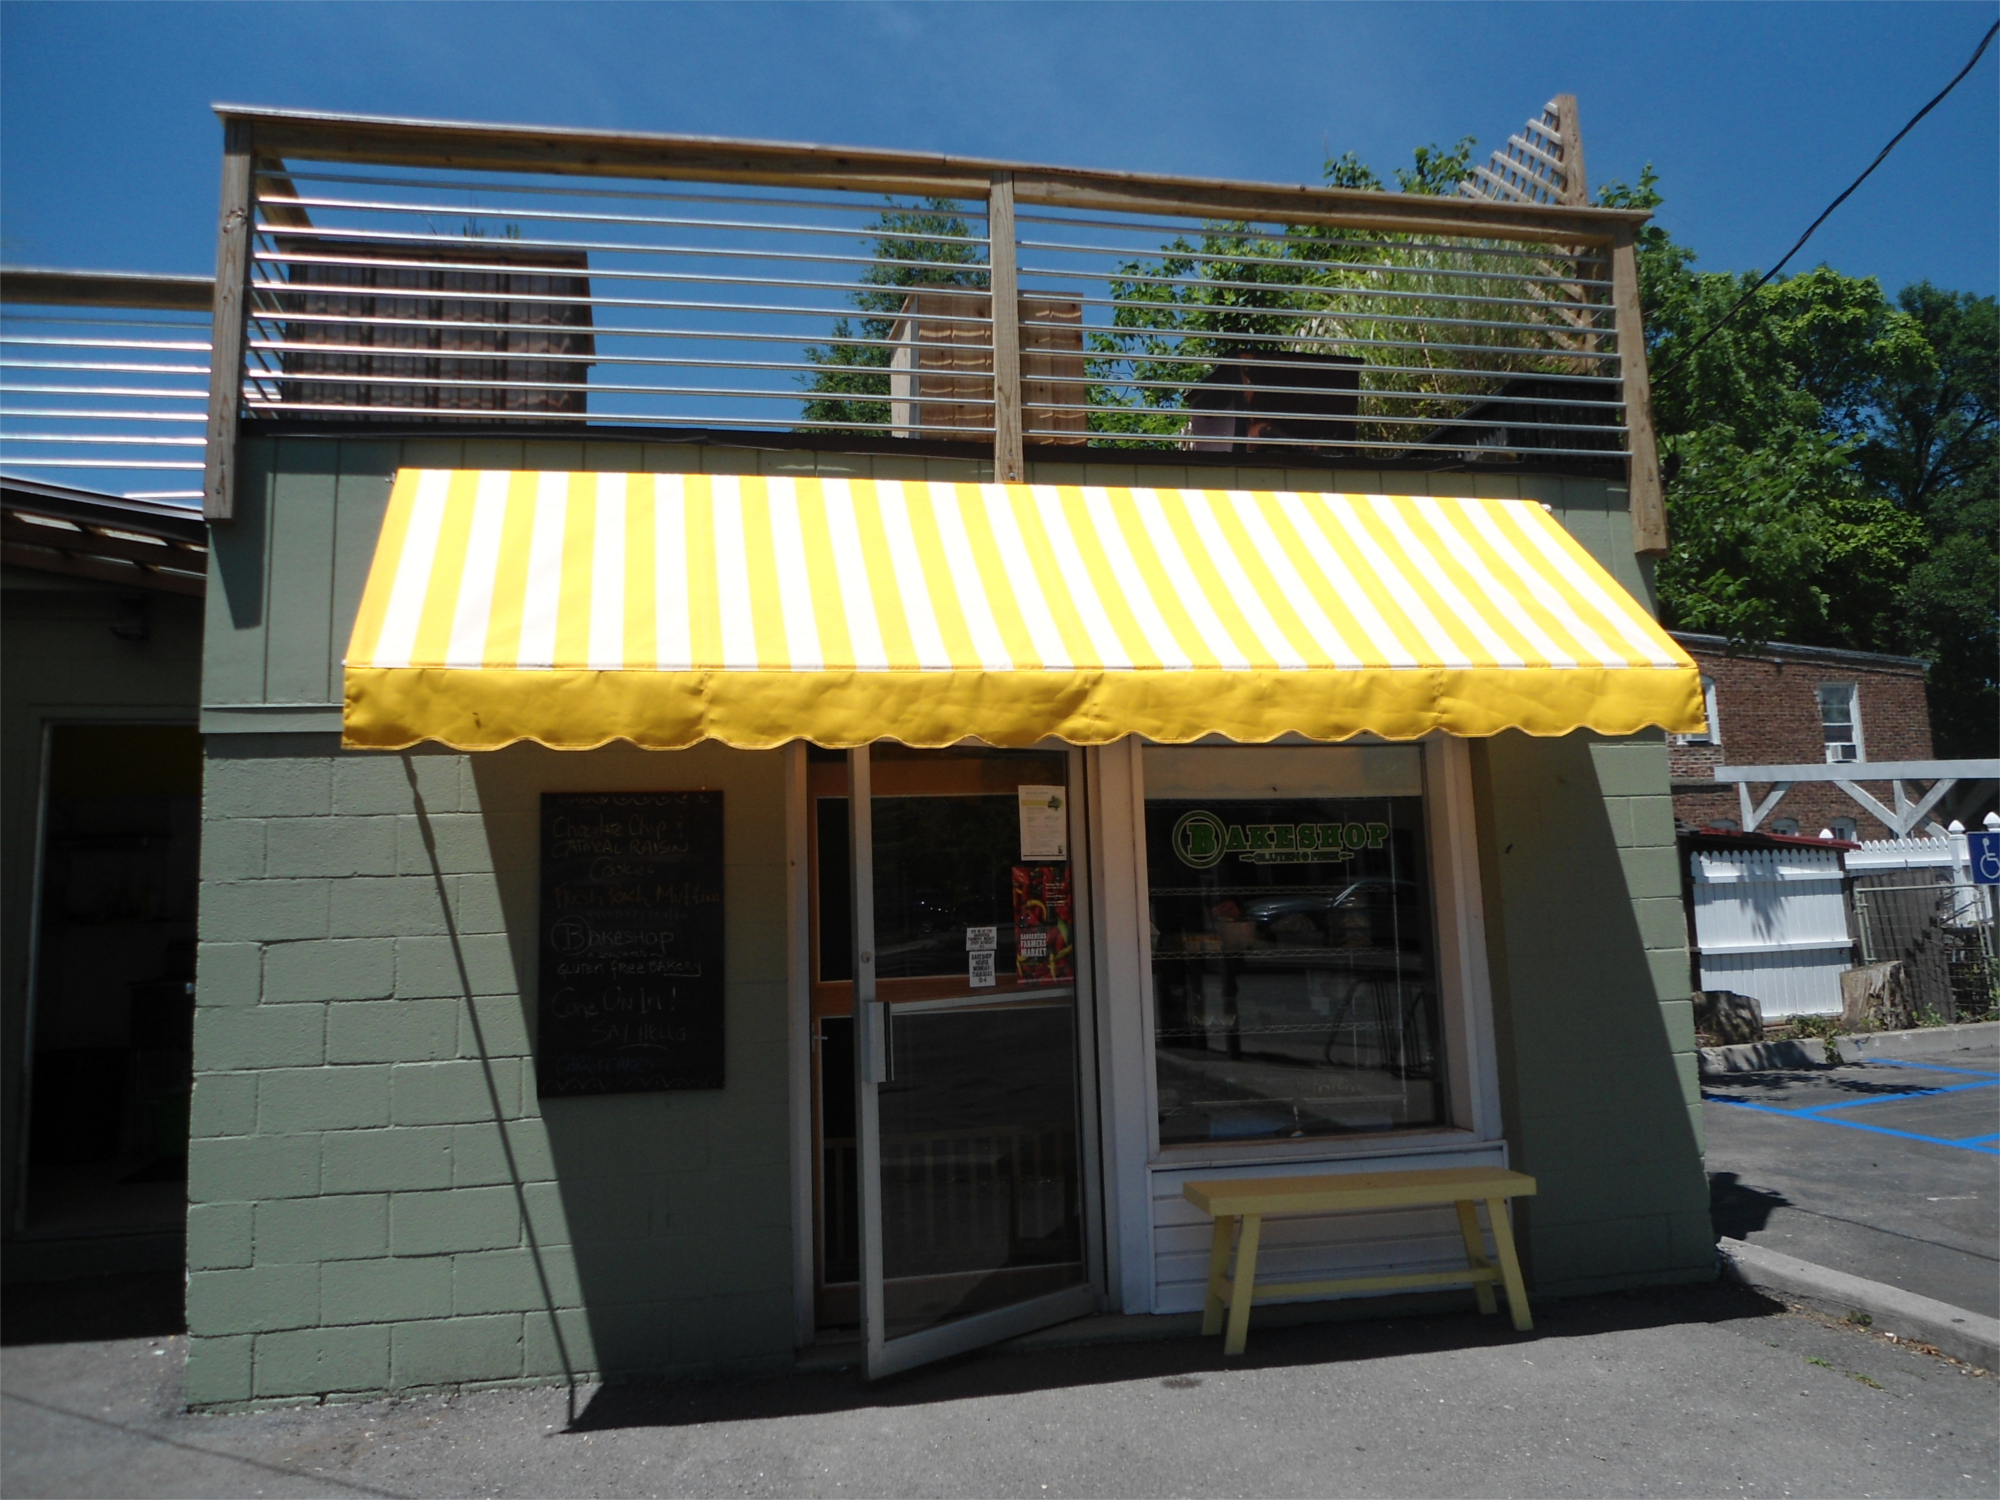 Commercial Retractable Awnings Awnings Direct